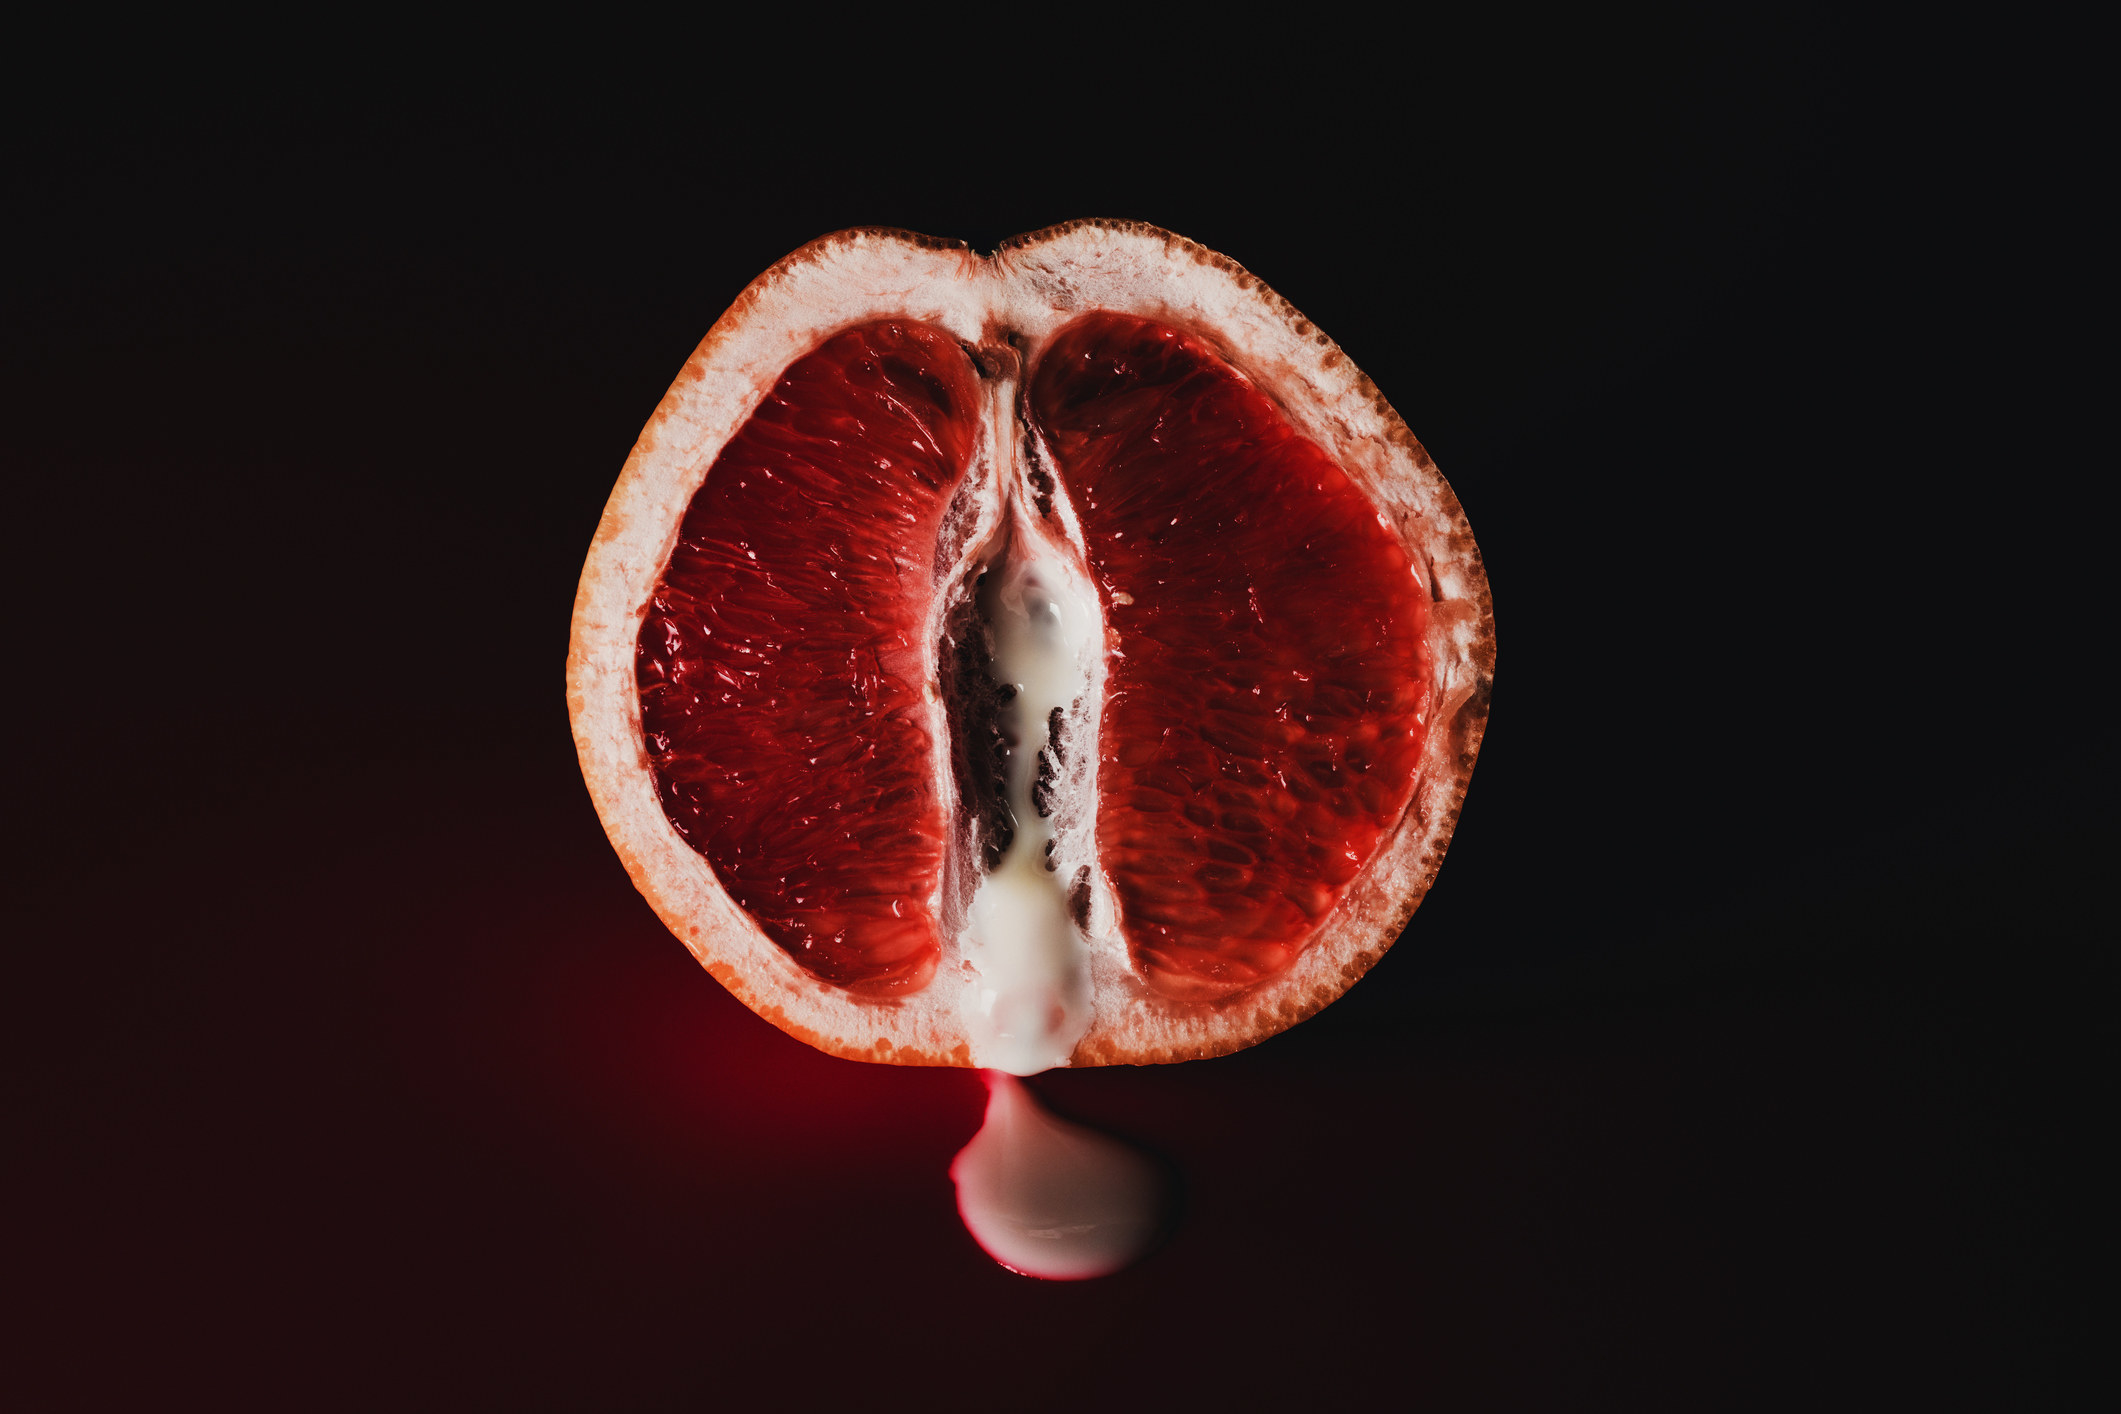 Stock image of a fruit with a red-like substance dripping out in front of a black background